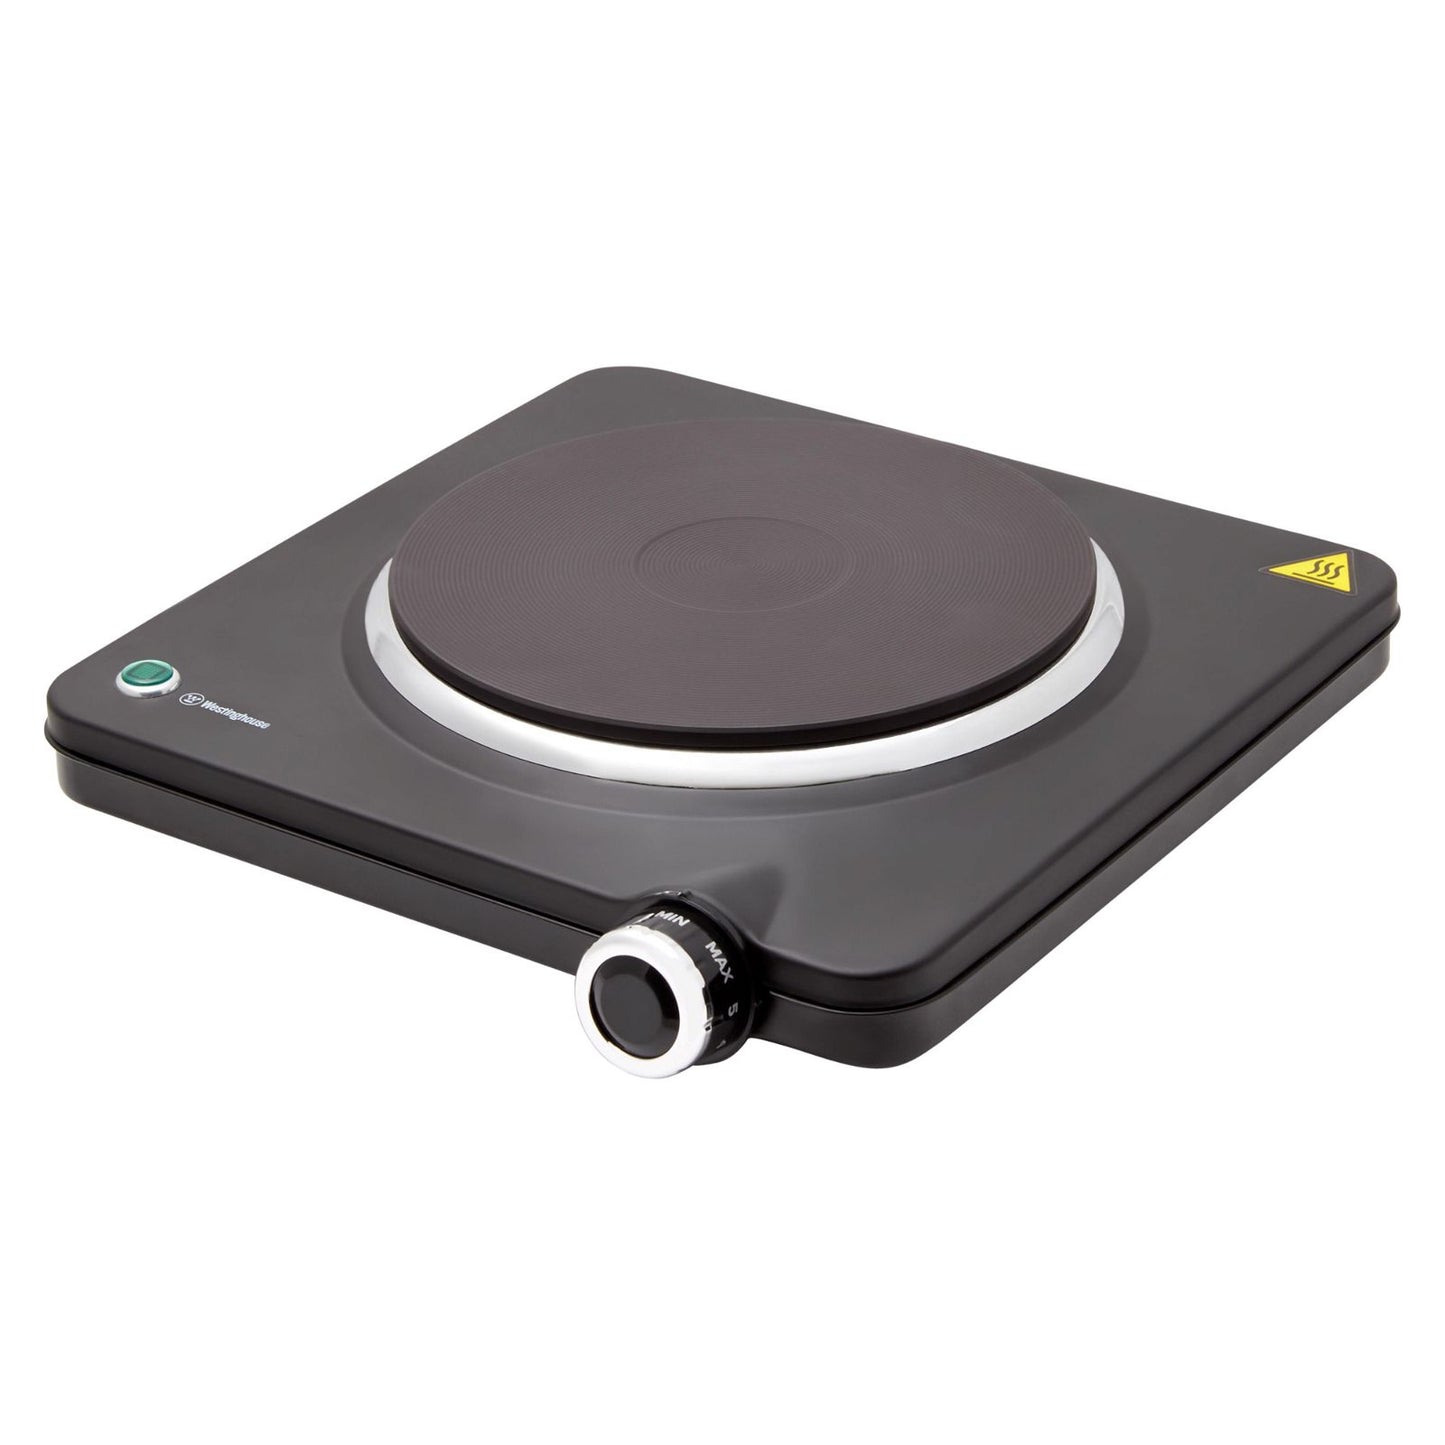 Westinghouse Single Electric Hot Plate Easy Operation Cast Iron Plate -  -  